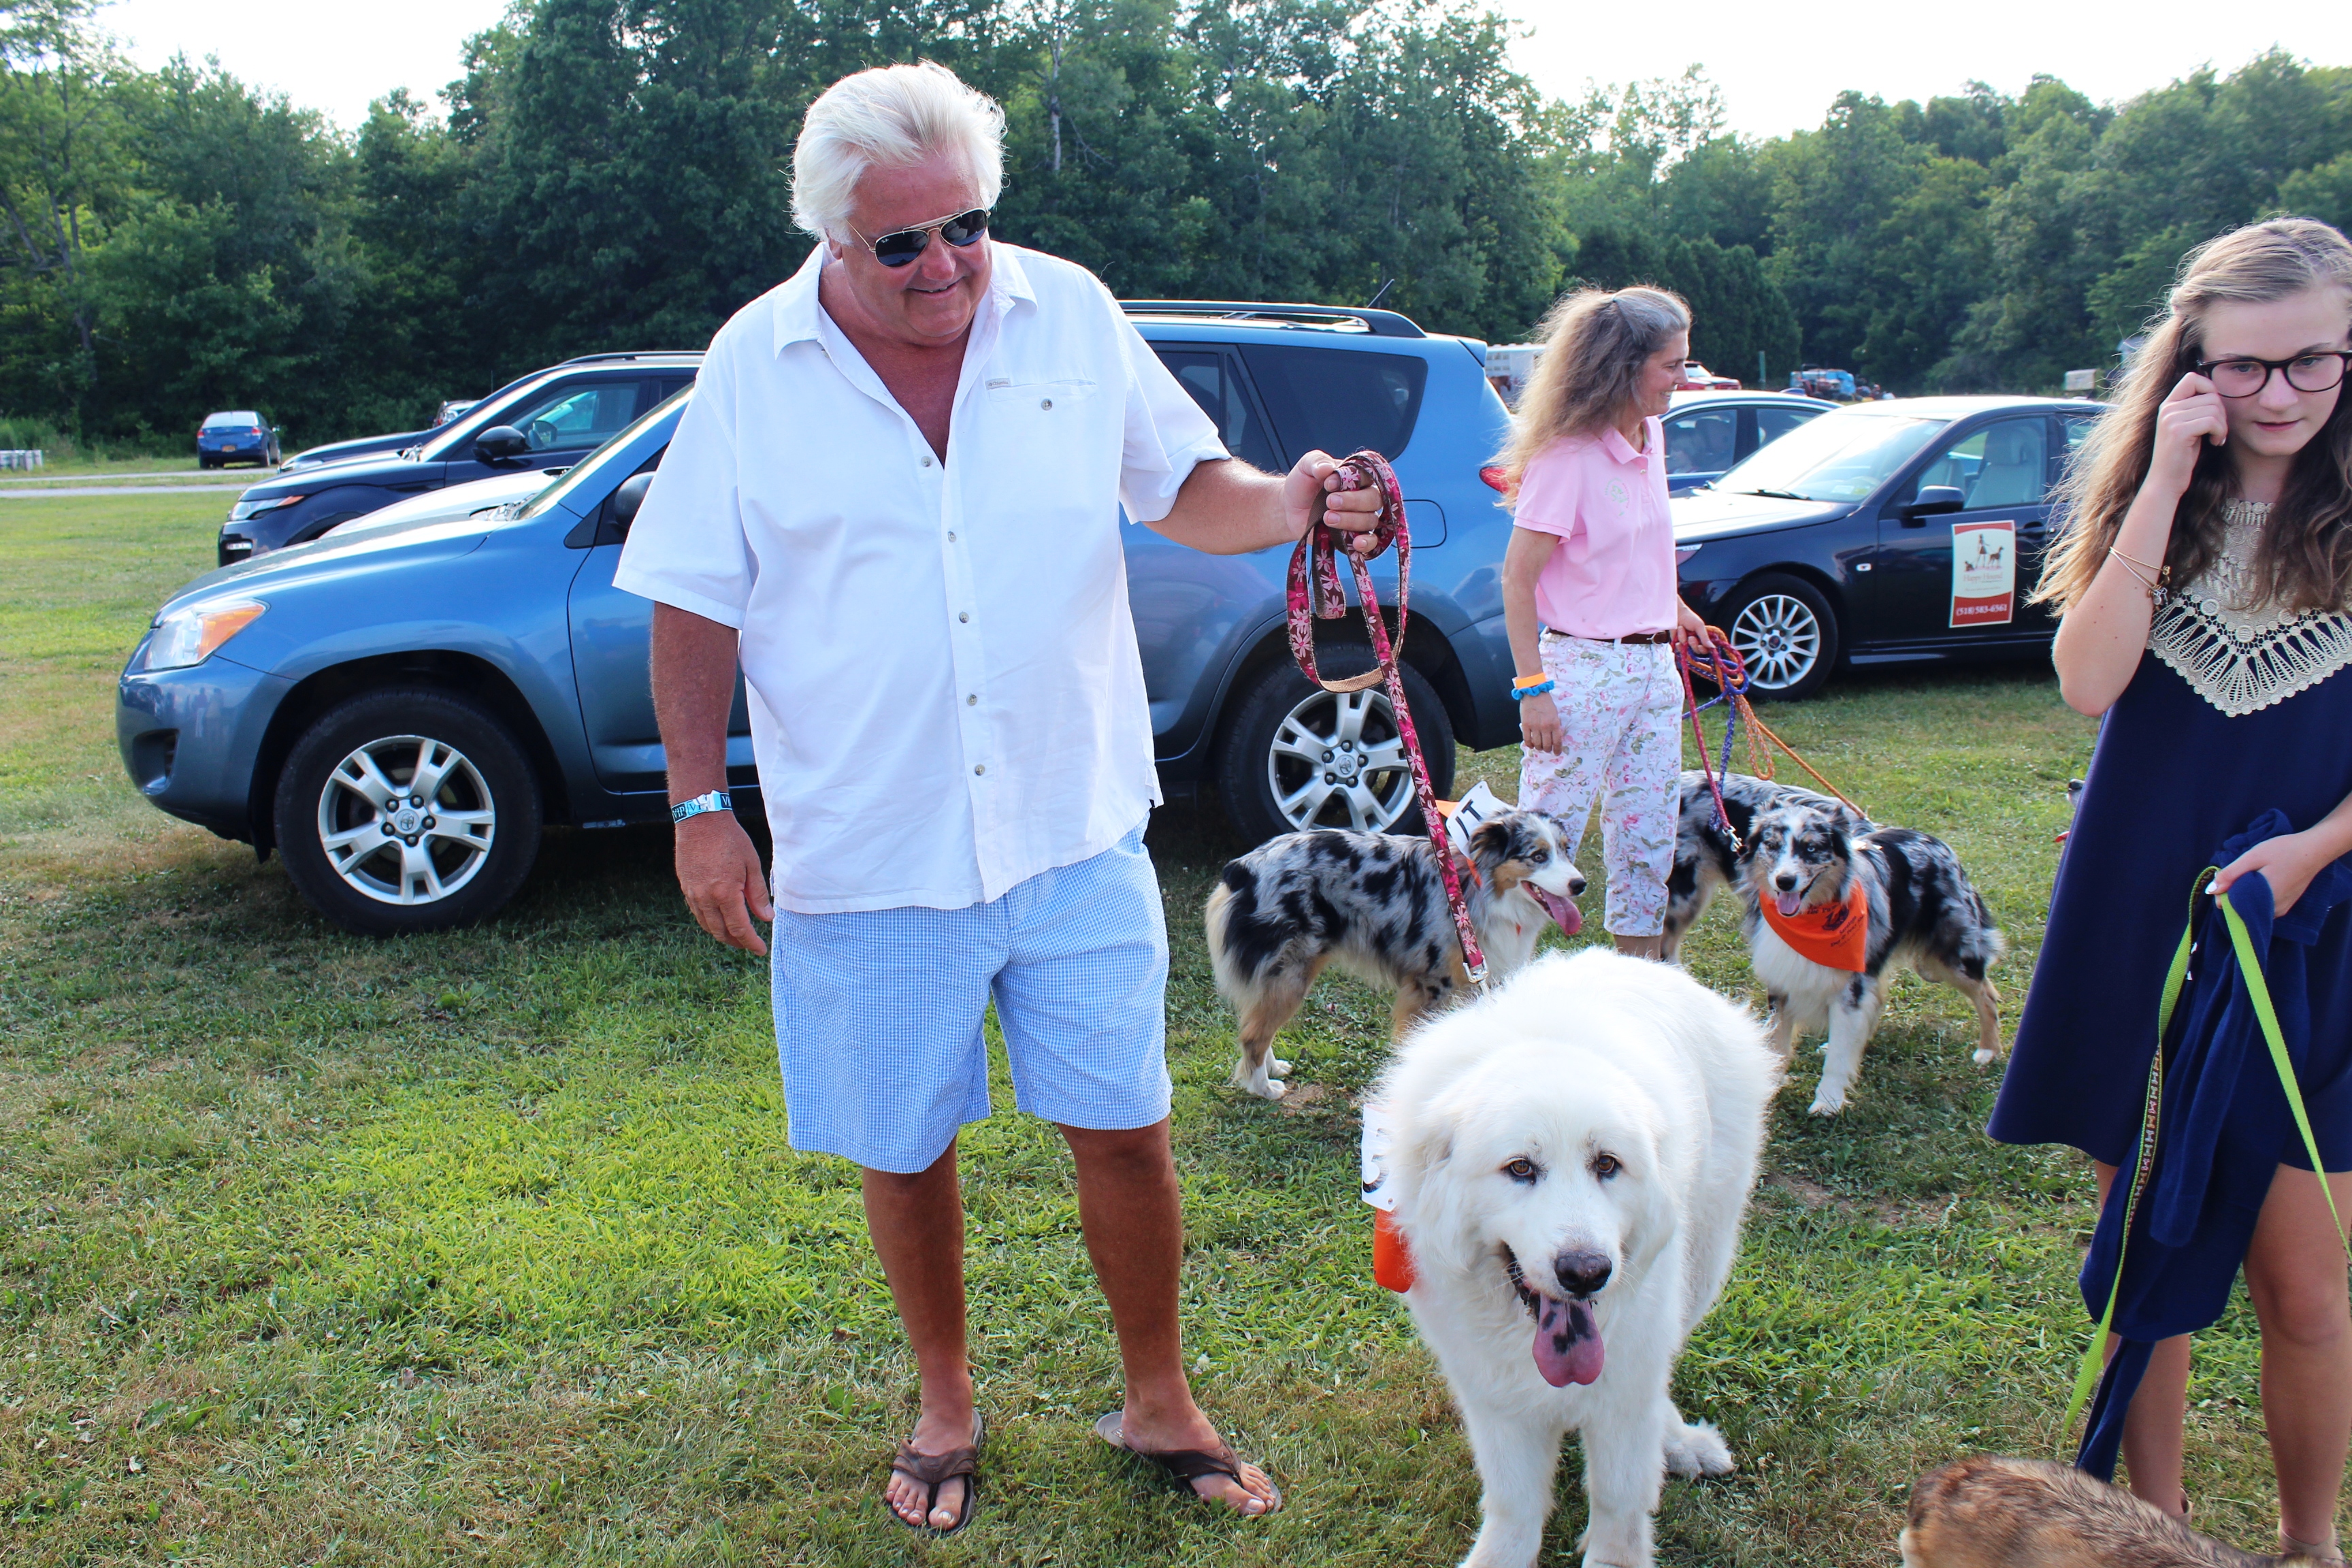 Man with big dog at the Saratoga Dog's Pony Show to benefit AIM Services, Inc.